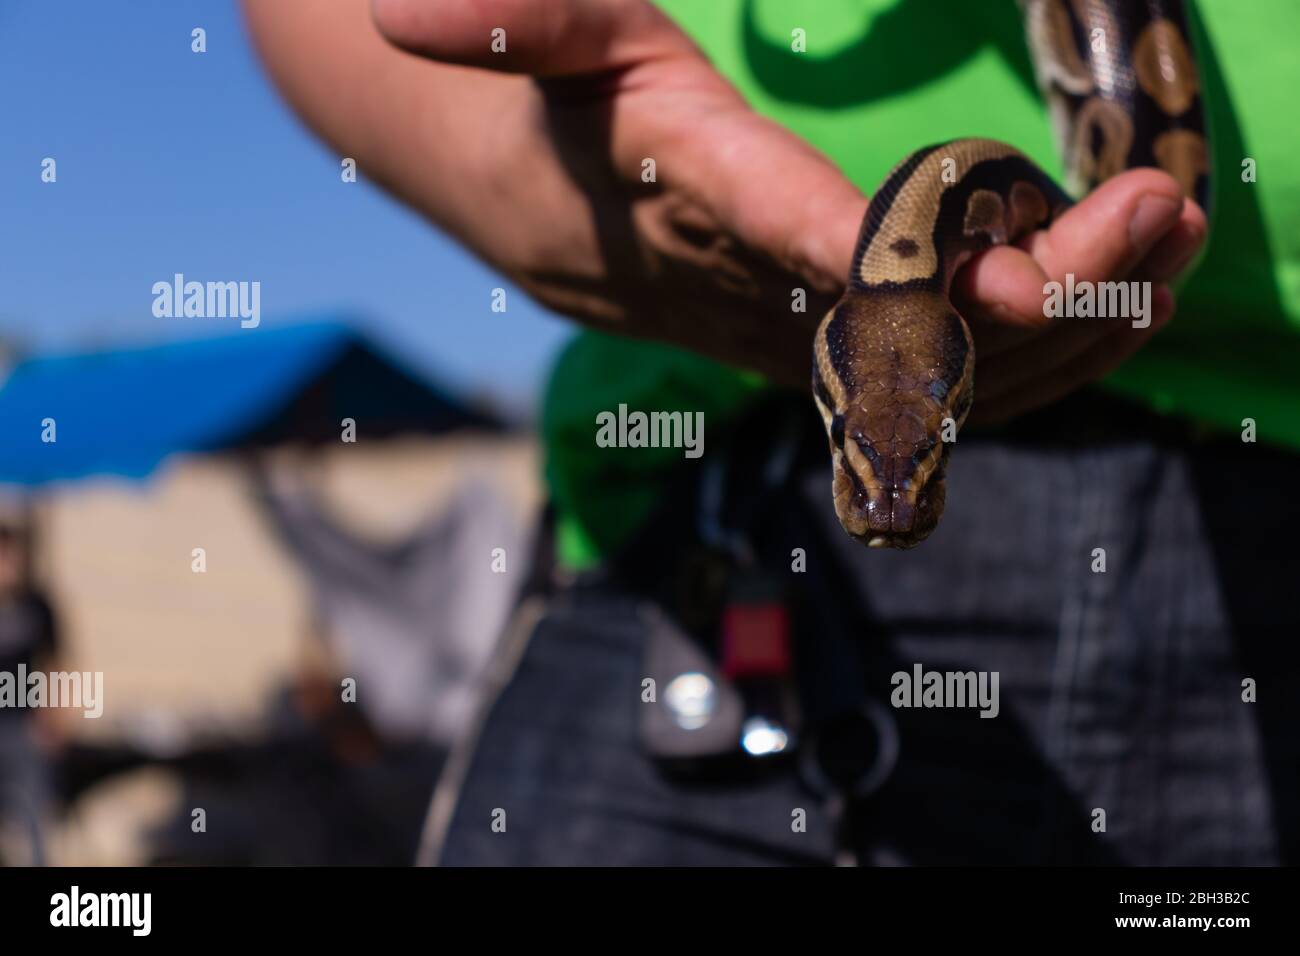 Man is holding small baby ball python that is crawling towards the camera. The snake is his pet. Stock Photo